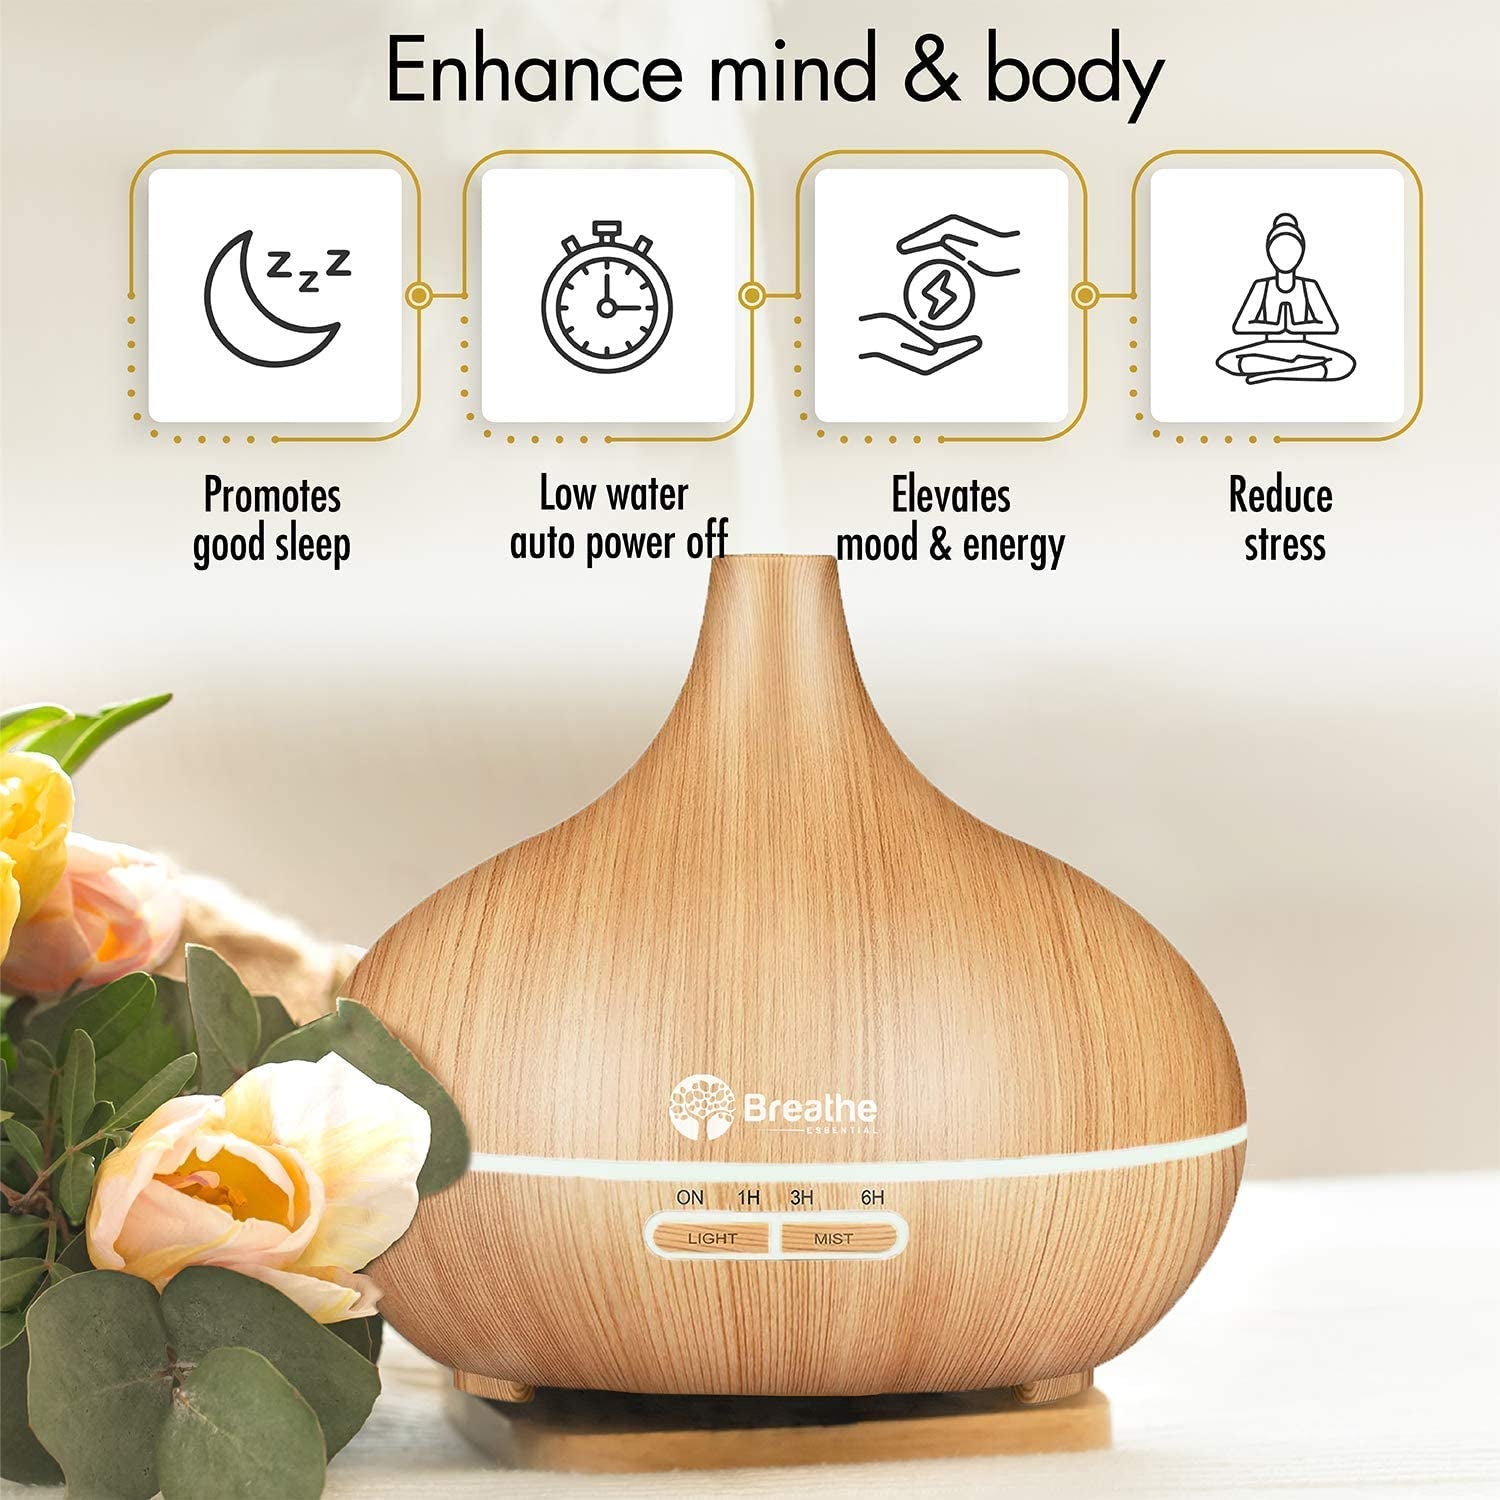 Oil Diffuser | 550Ml Diffusers for Essential Oils with Cleaning Kit & Measuring Cup, 18 Hour Runtime, 16 LED Light Settings & Auto Power off (Natural Oak)